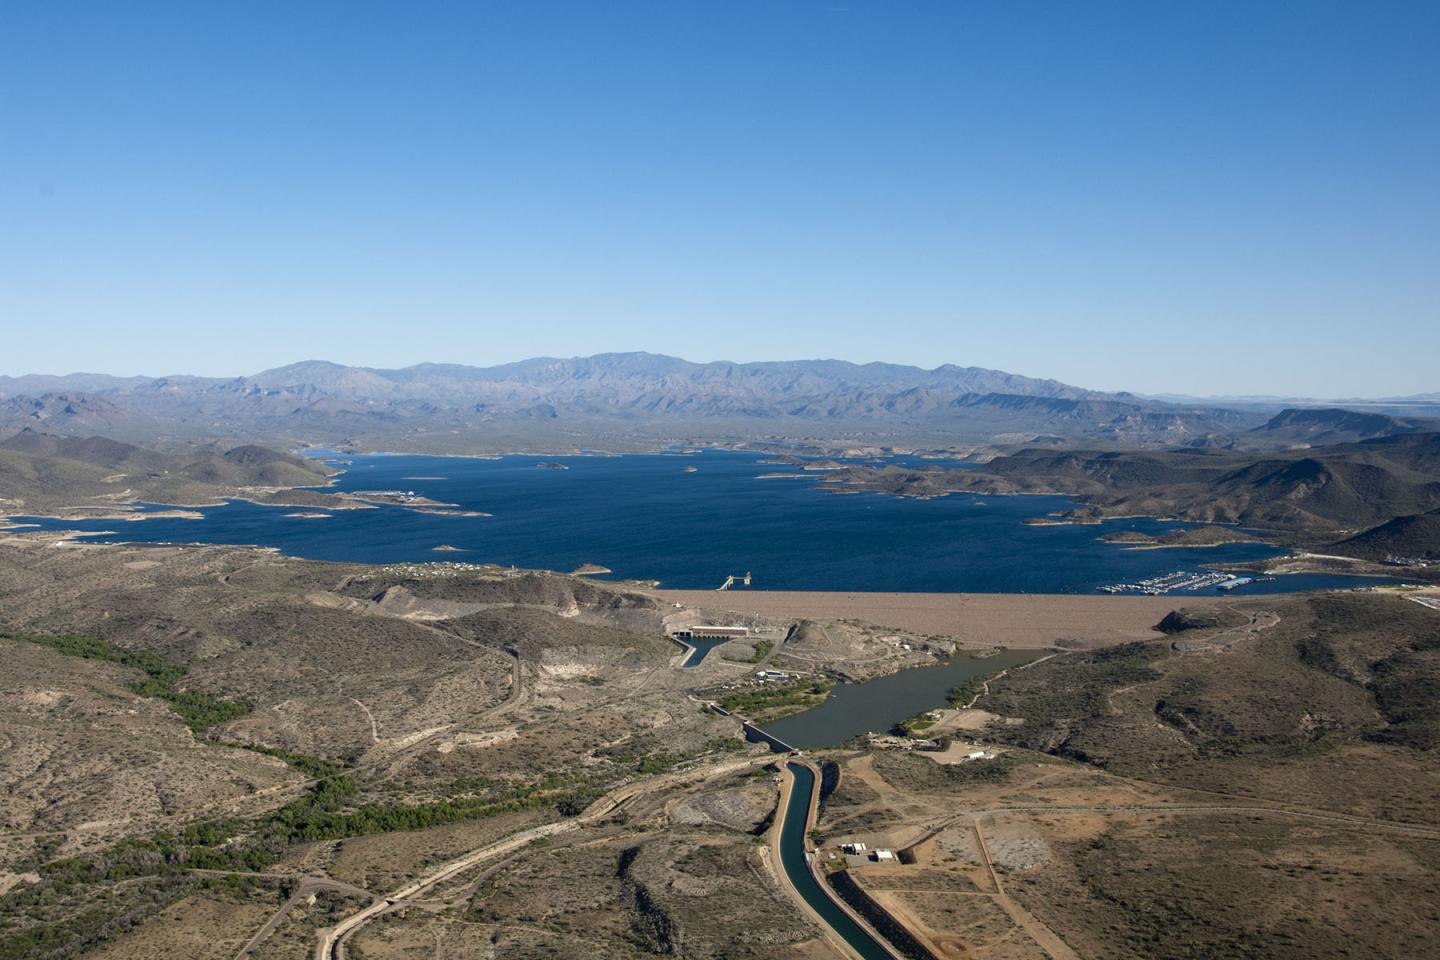 Reservoir and Irrigation System Serving Greater Phoenix